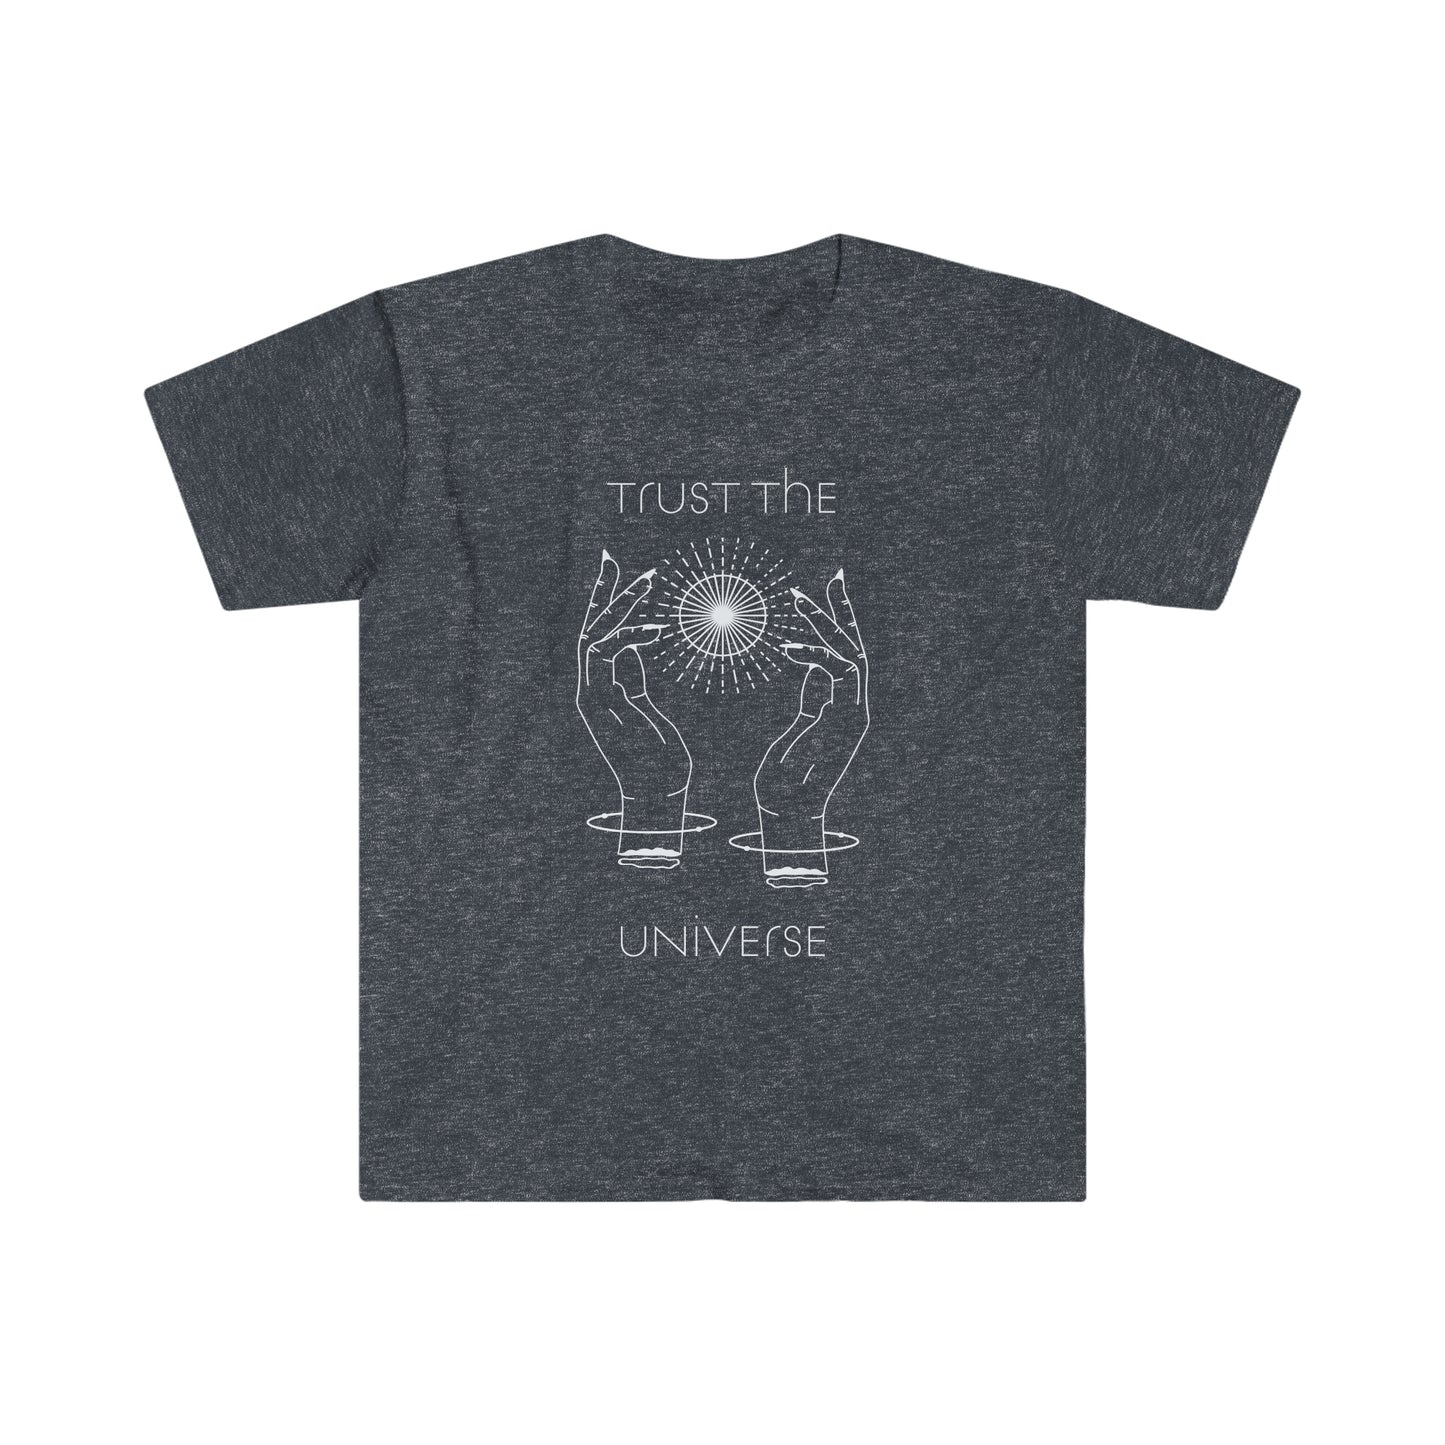 Trust the Universe!. Inspirational tee. 100% soft cotton